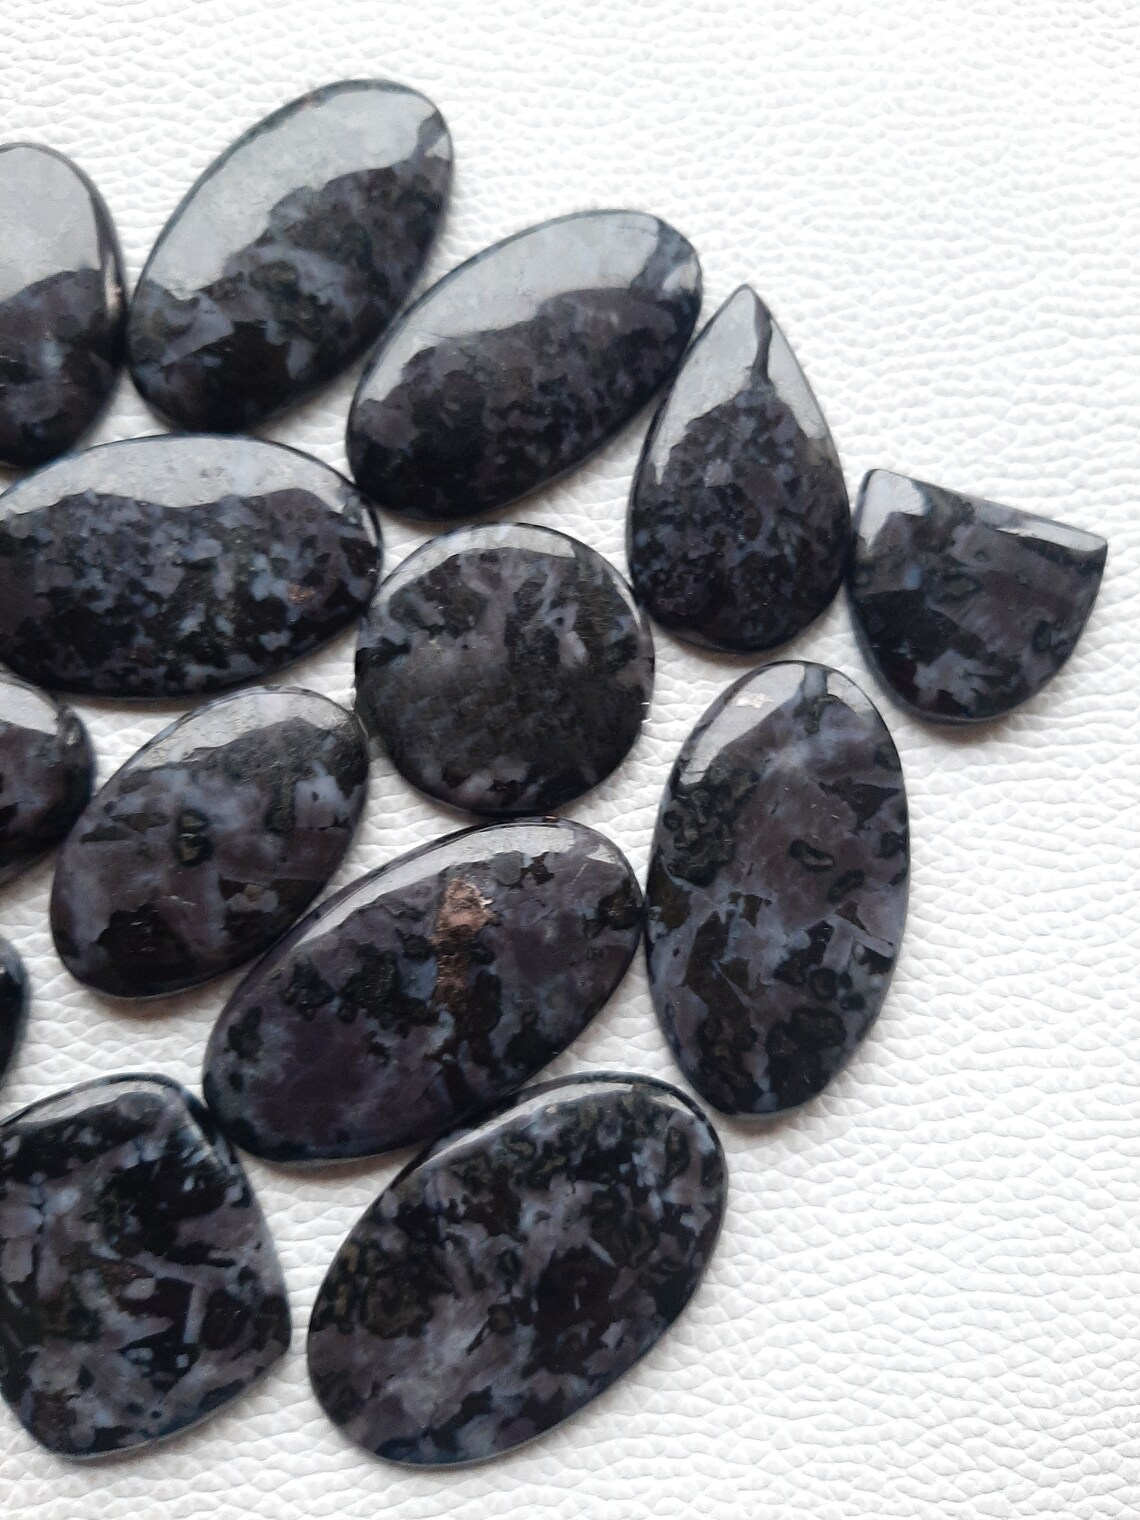 Wholesale Lot of Gabbro Jasper Cabochon By Weight With Different Shapes And Sizes Used For Jewelry Making (Natural)